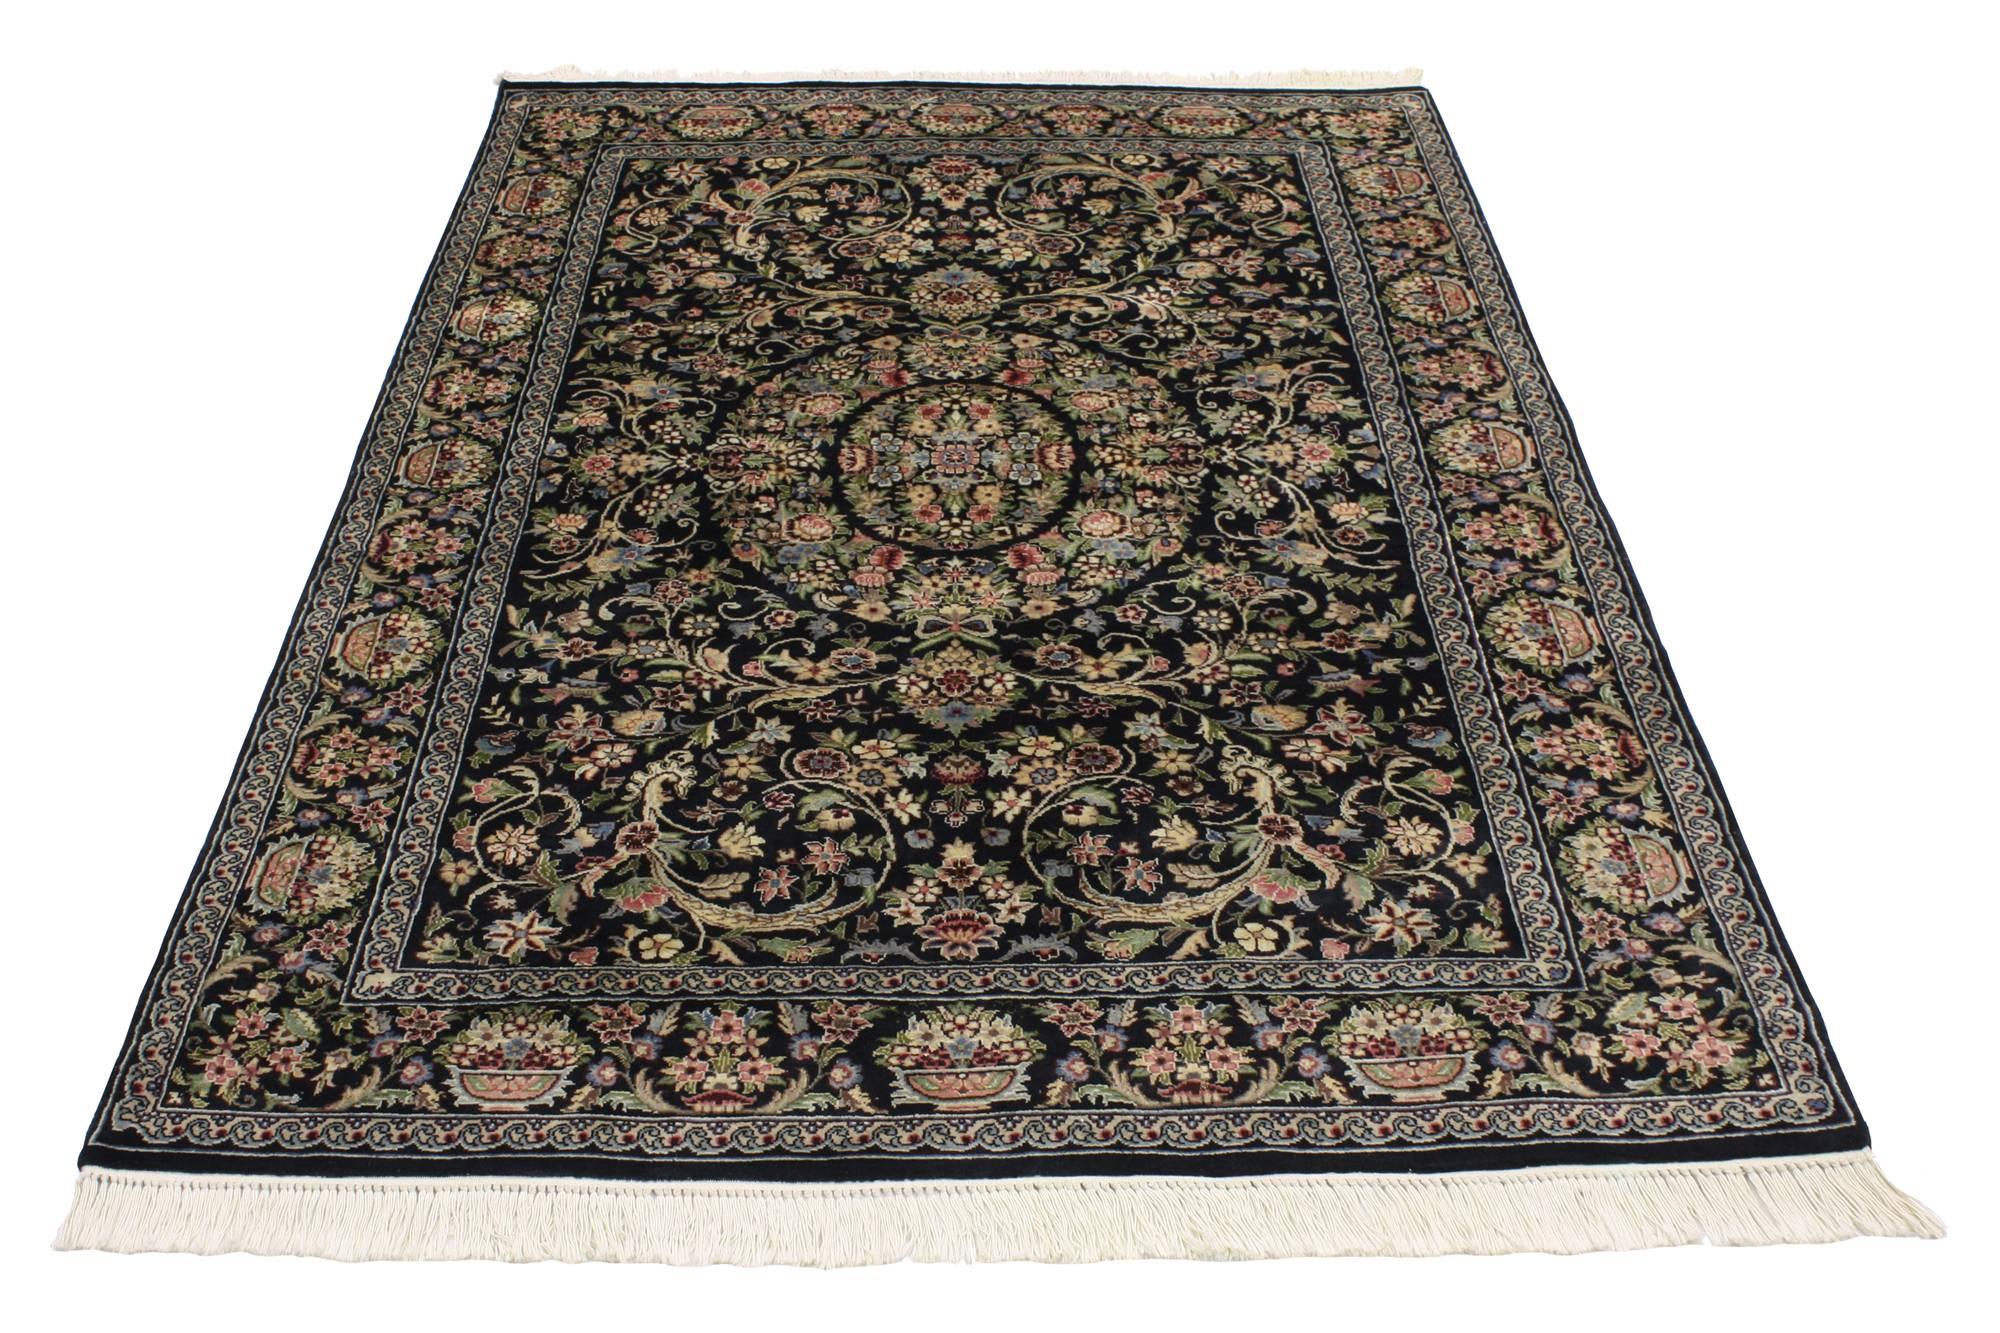 76855 Vintage Aubusson Garden Area Rug with Baroque Floral Chintz Style 04'00 x 06'01. Drawing inspiration from Mario Buatta and Chintz style, this hand-knotted wool vintage Aubusson Garden style area rug features the full blossoms of flower